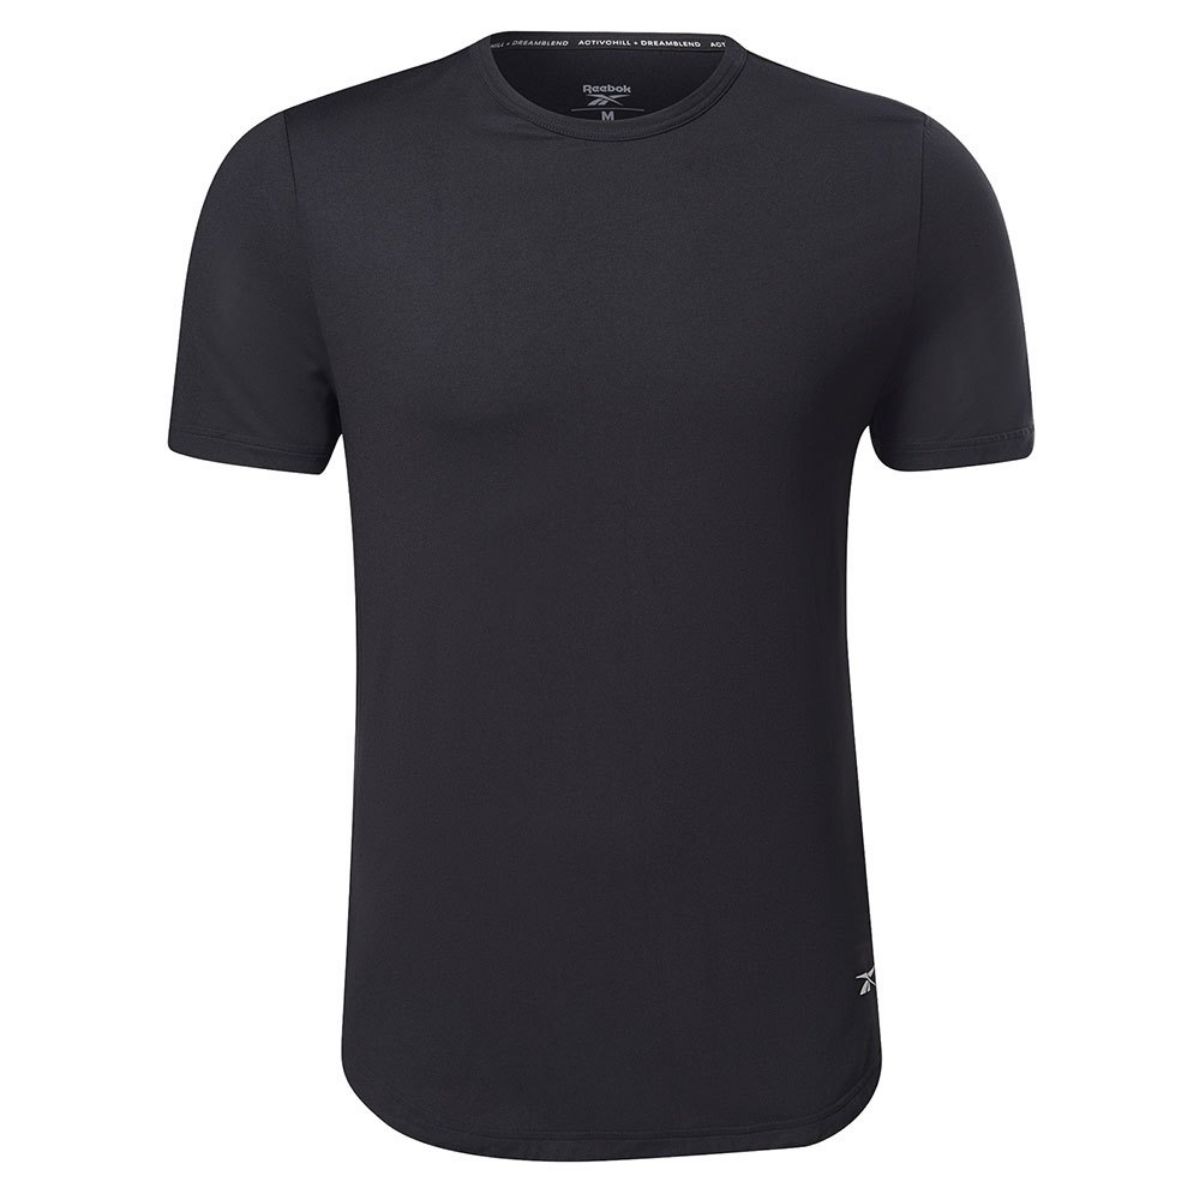 Best for either training or casual lifestyle wear	